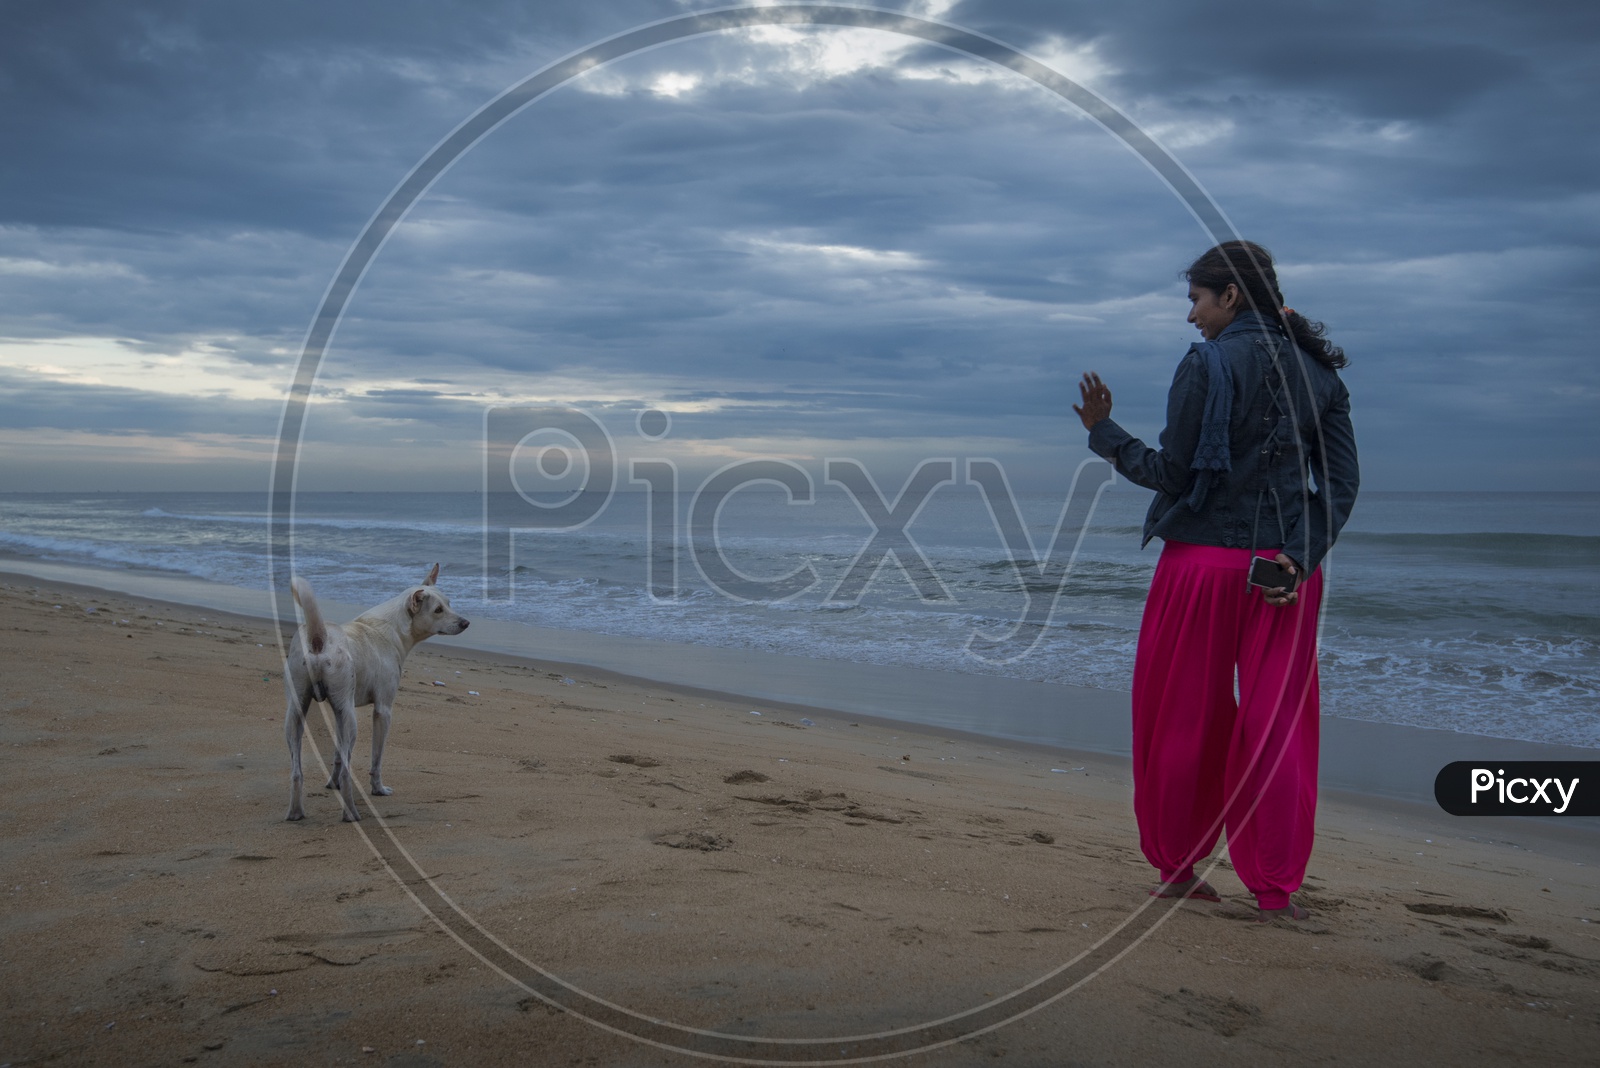 A young girl and a dog at the beach